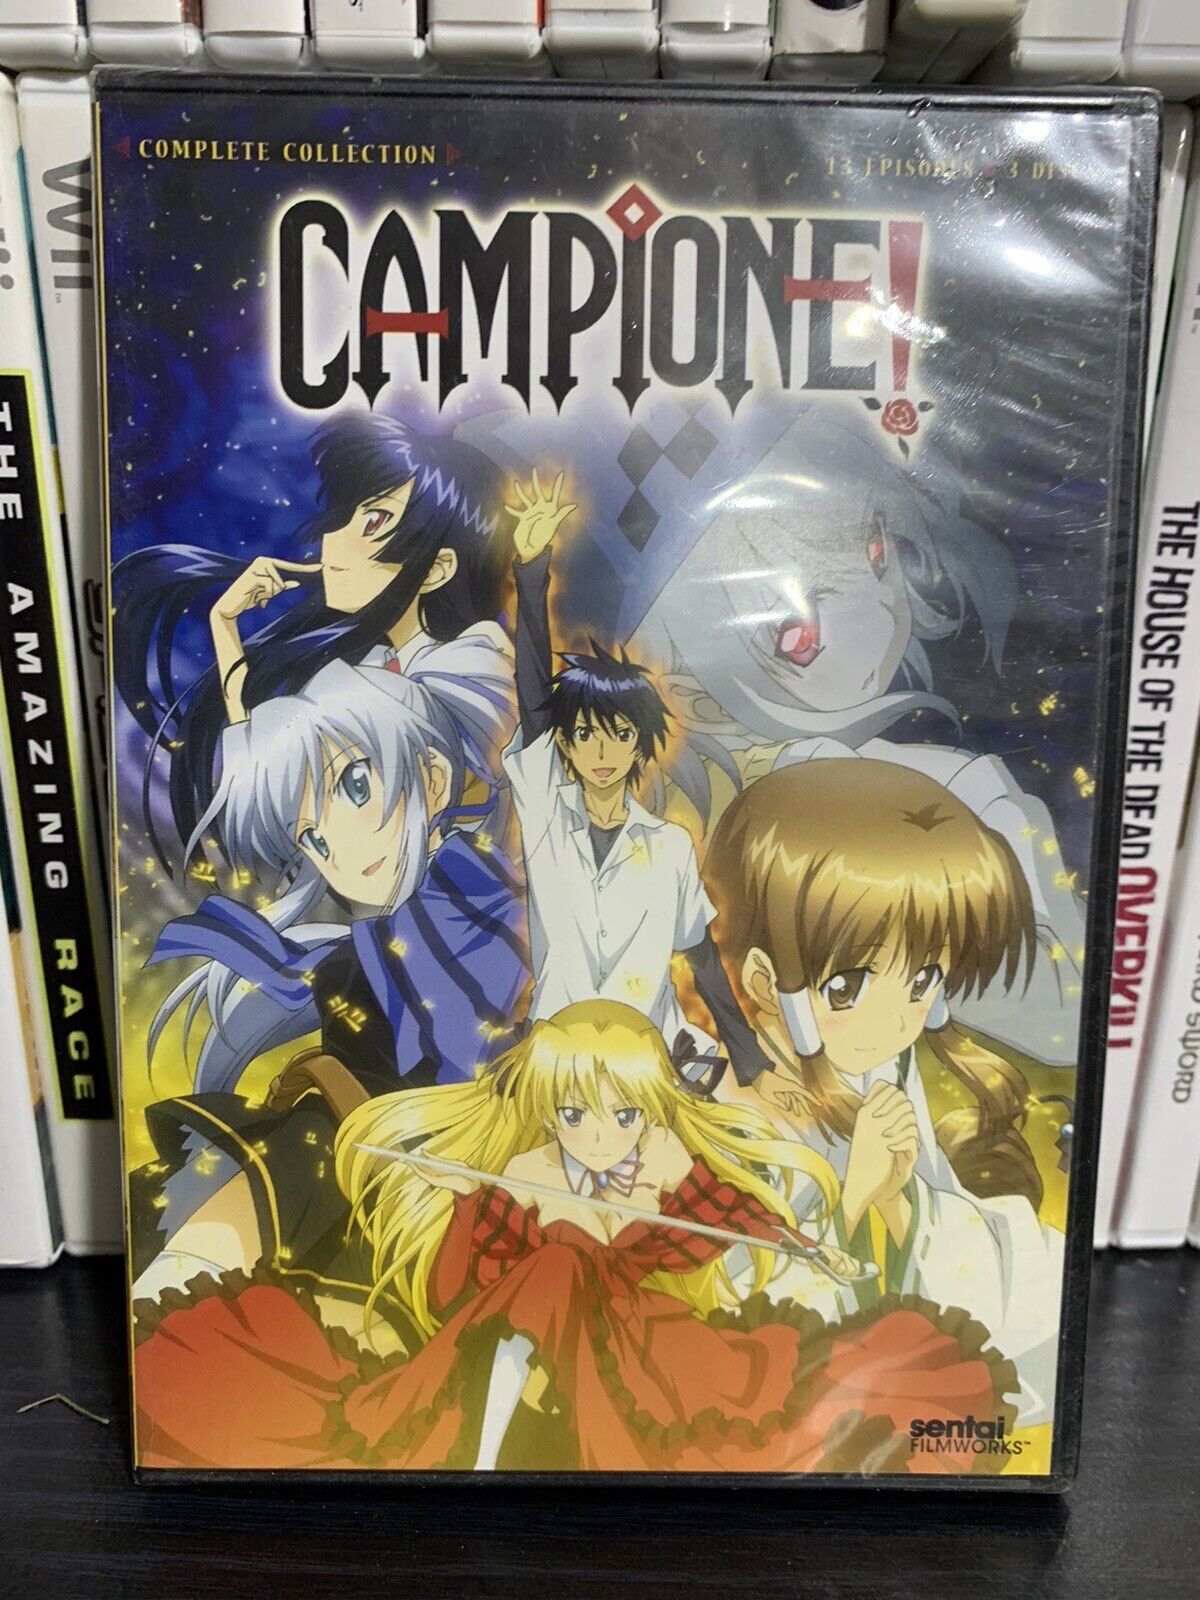 danny mendes recommends Campione Anime English Dub